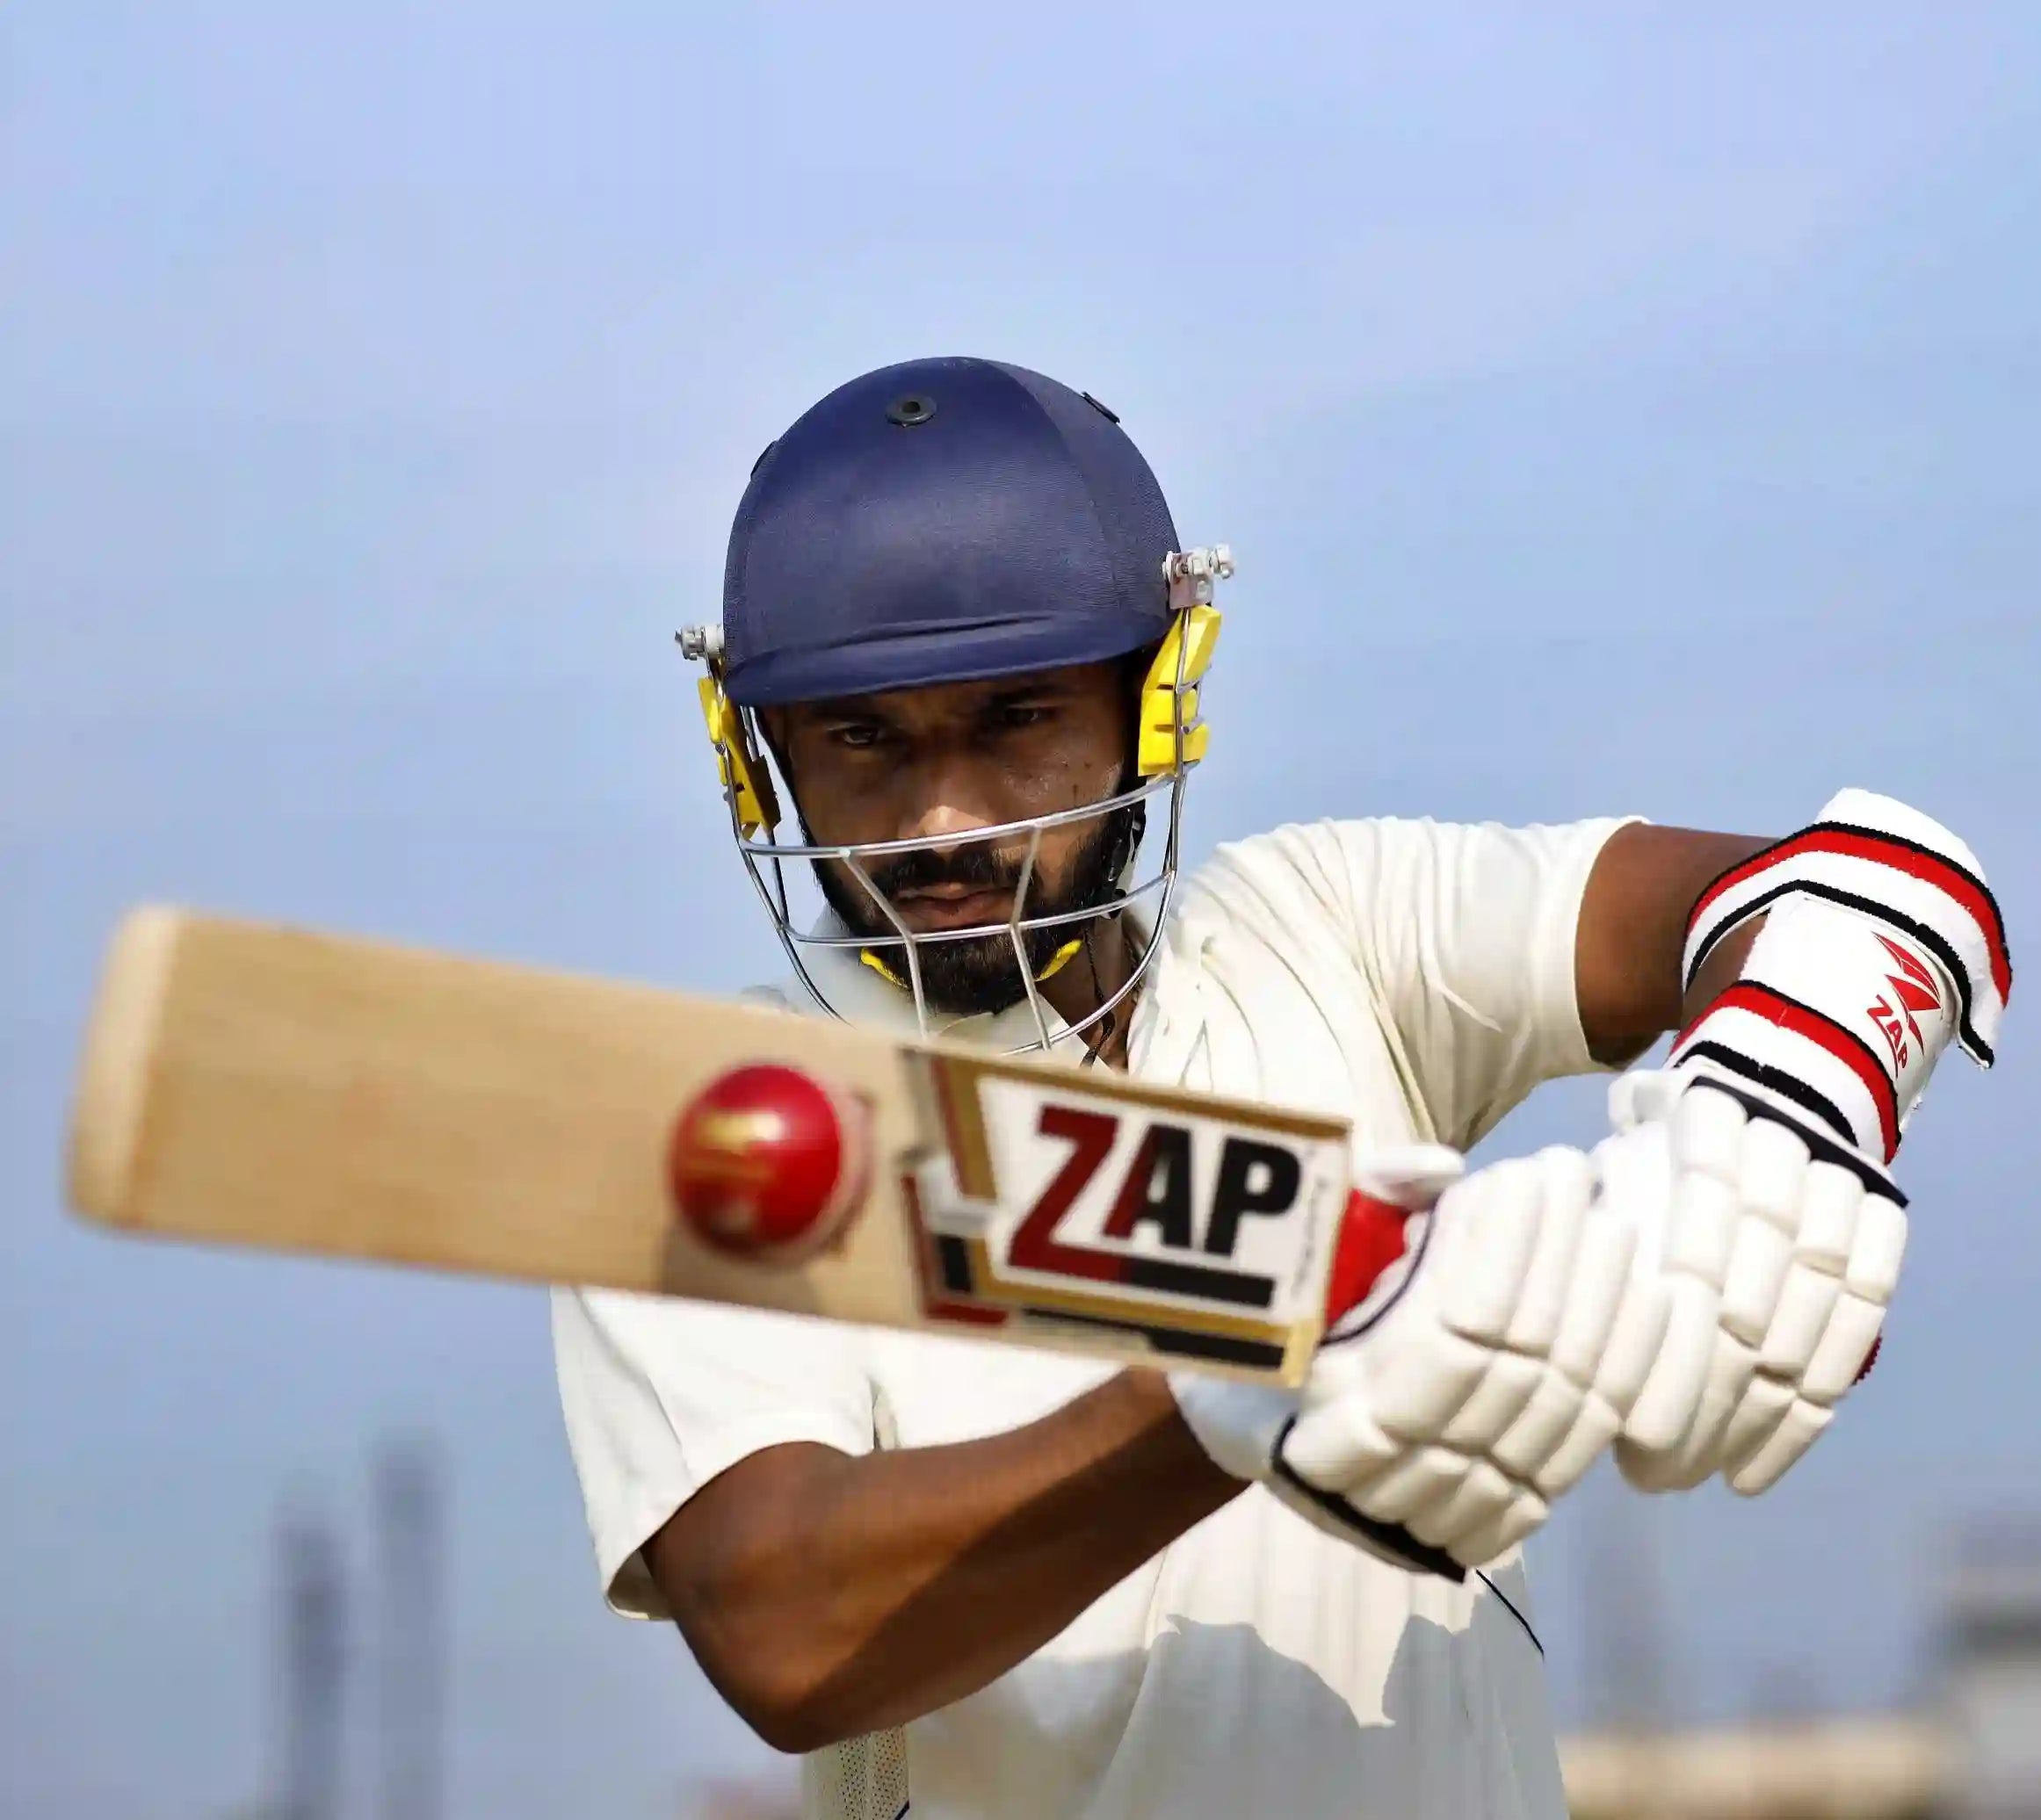 A player plays a pull shot with a ZAP Cricket Bat and Goves in hand